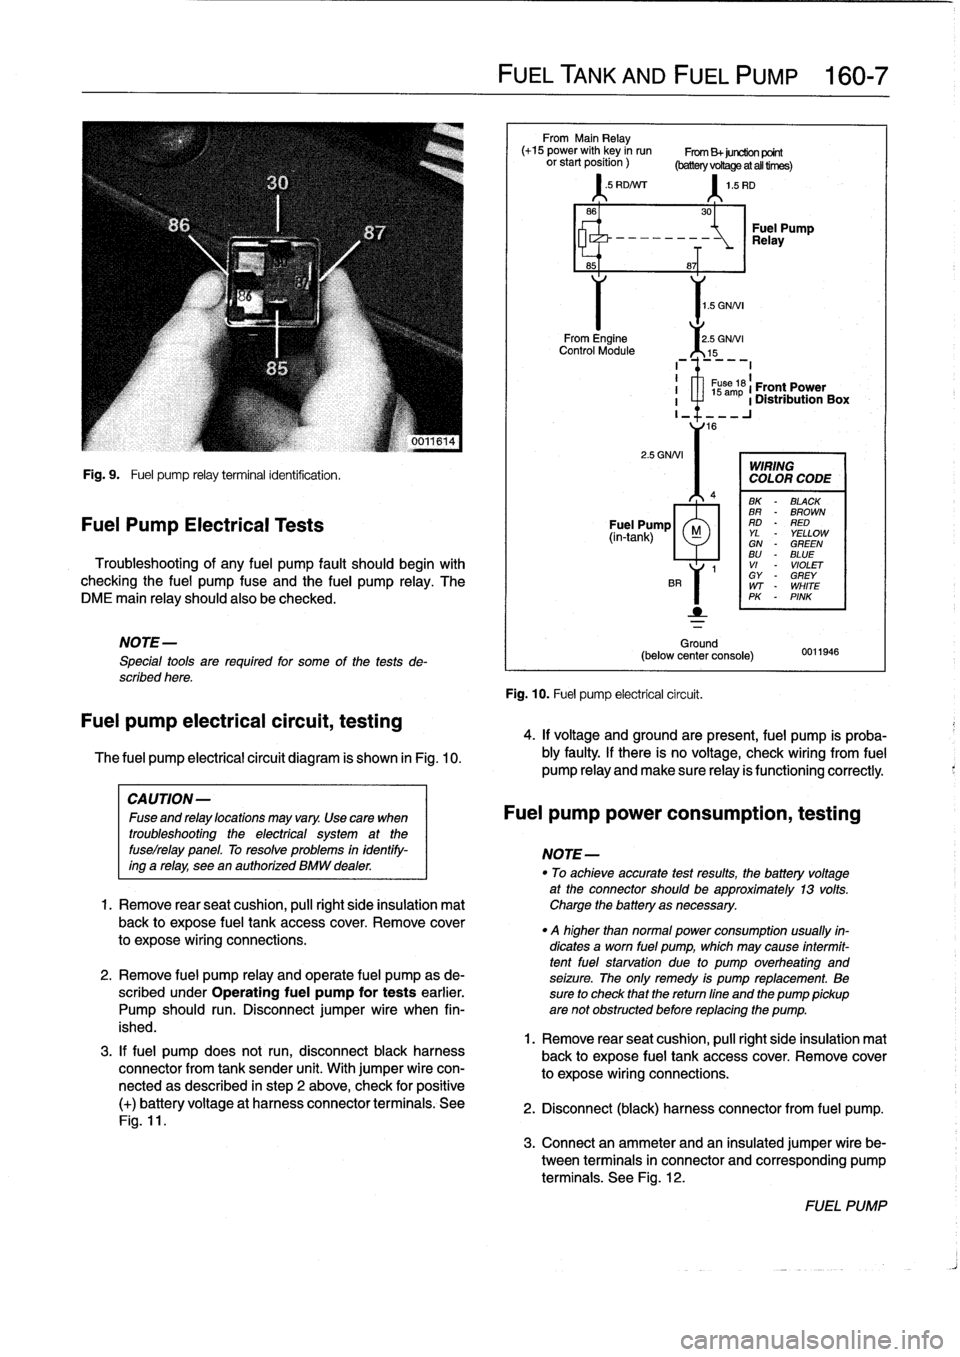 BMW M3 1993 E36 Workshop Manual 
Fig
.
9
.

	

Fuel
pump
relay
terminal
identification
.

Fuel
Pump
Electrical
Tests

Troubleshooting
of
any
fuel
pump
fault
should
begin
with

checking
the
fuel
pump
fuse
and
the
fuel
pump
relay
.
Th